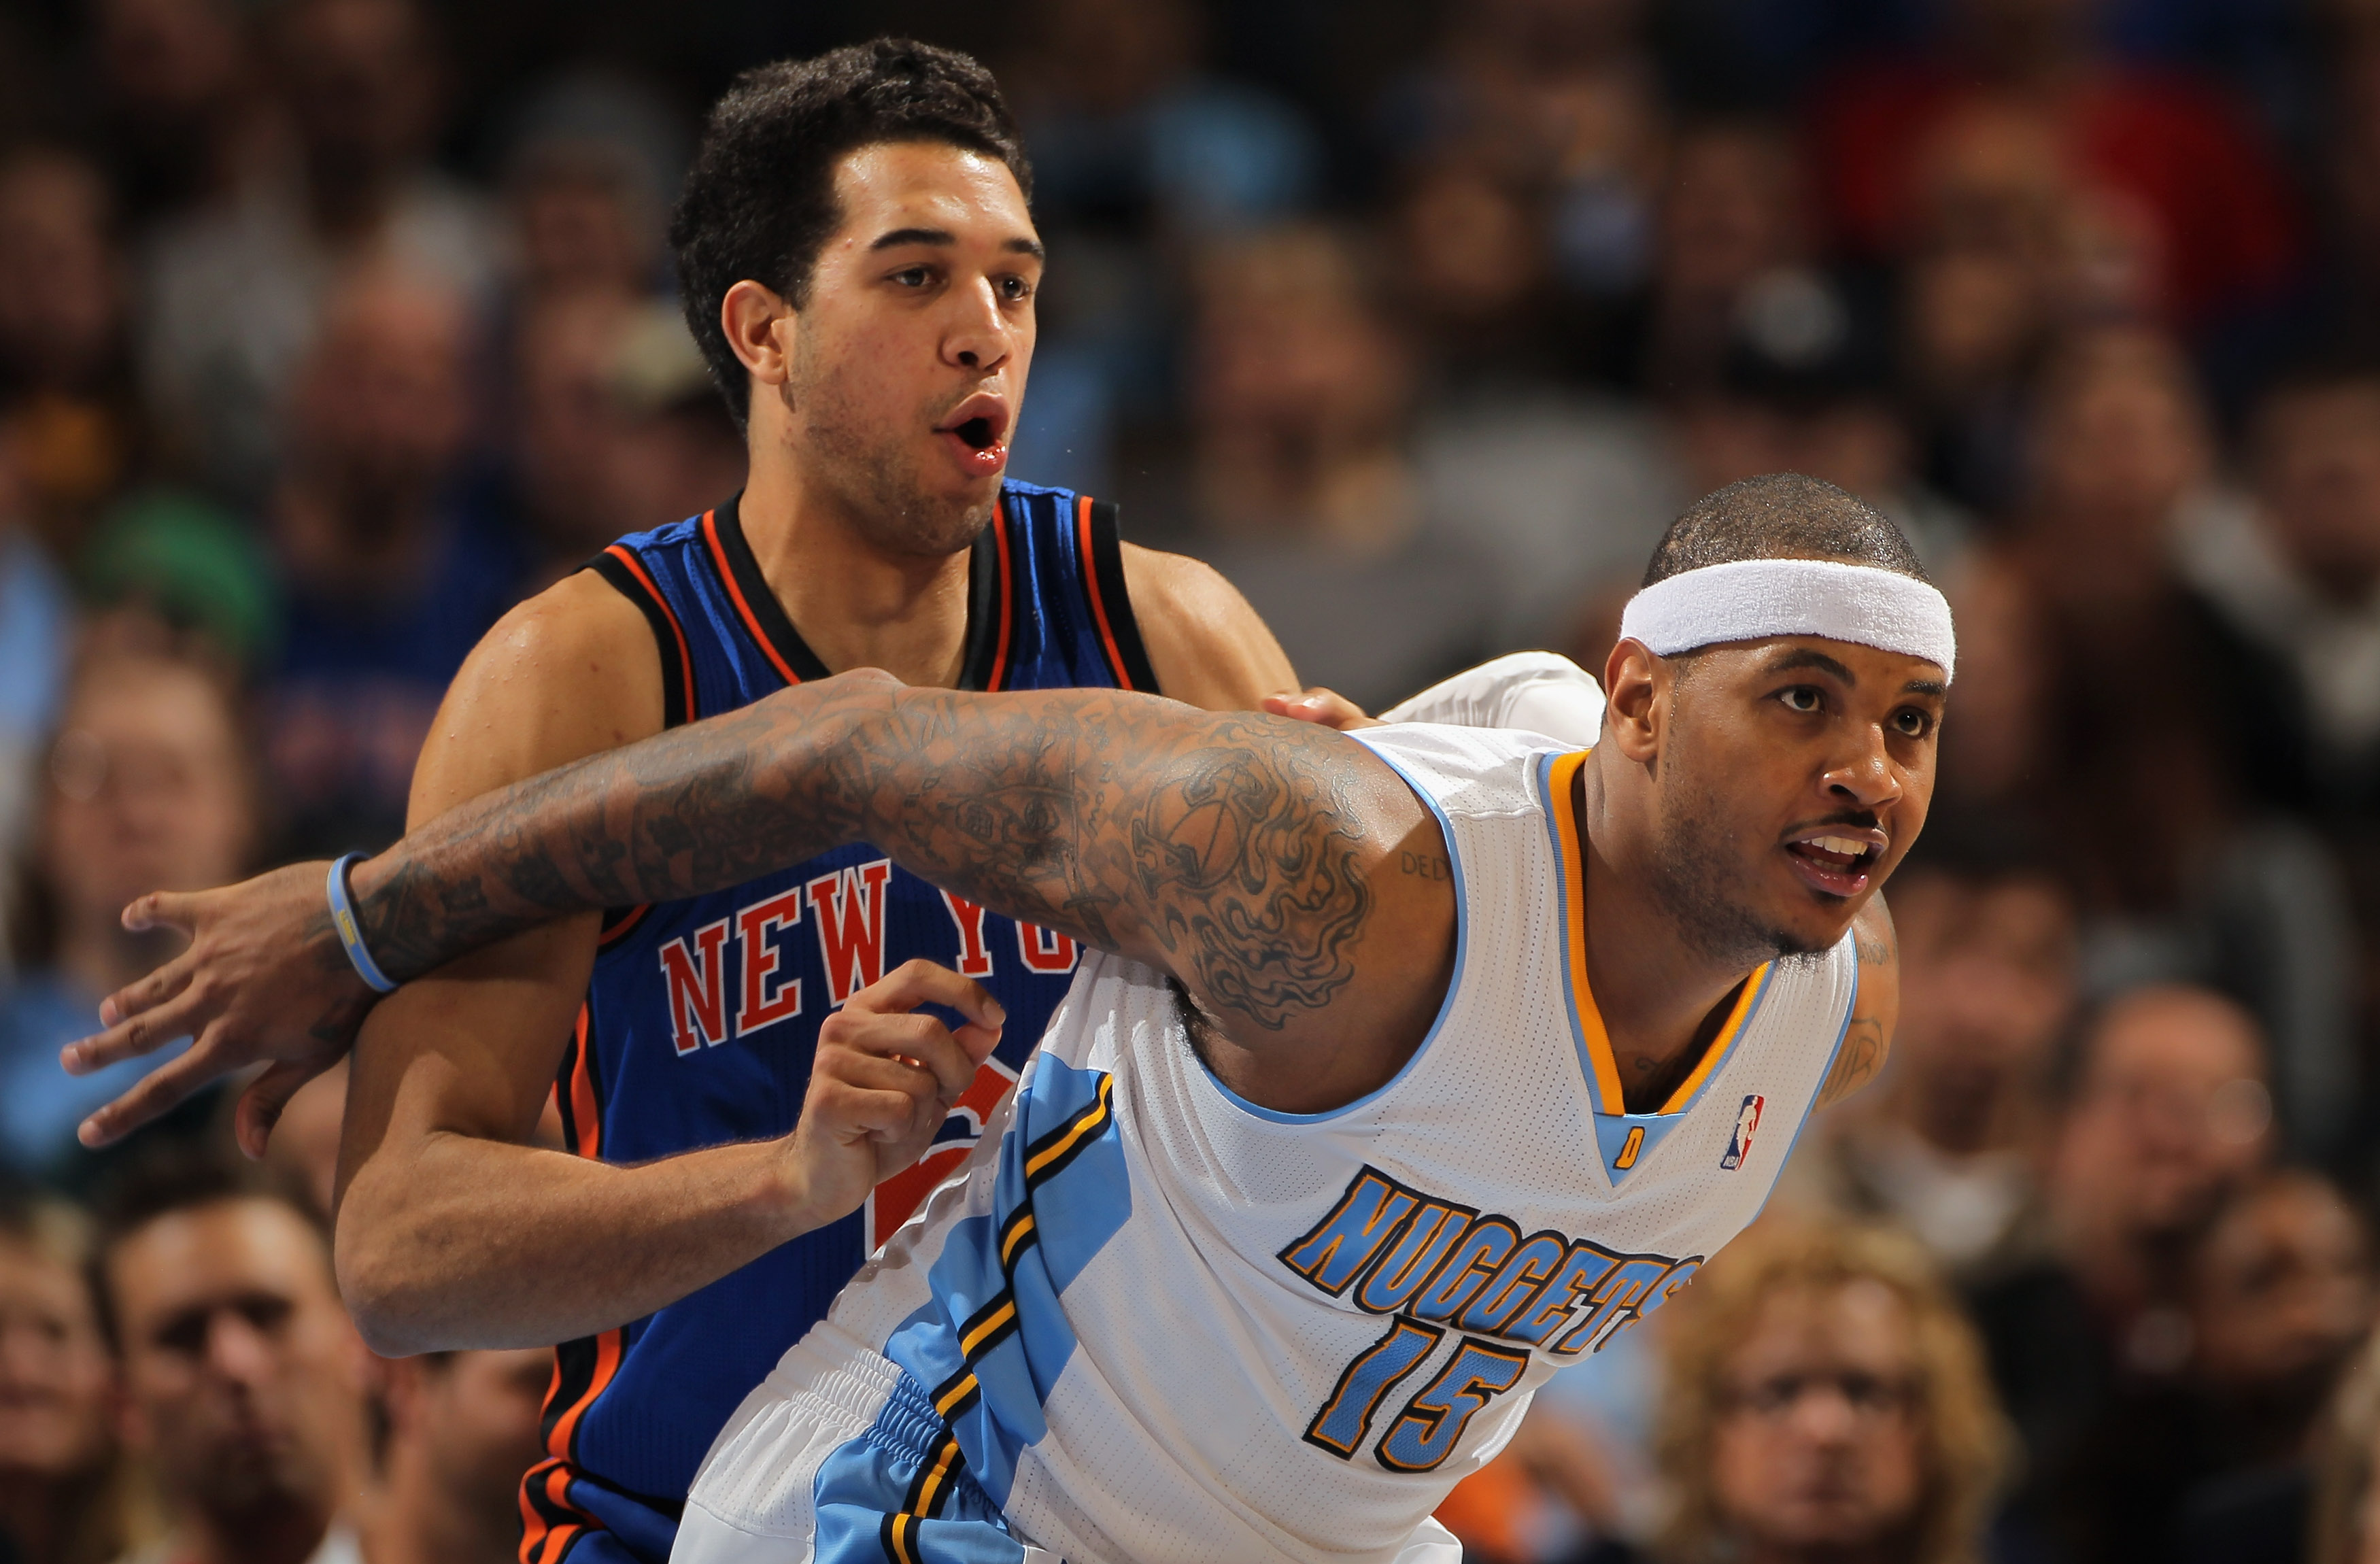 DENVER - NOVEMBER 16:  Carmelo Anthony #15 of the Denver Nuggets fights for position with Landry Fields #6 of the New York Knicks at the Pepsi Center on November 16, 2010 in Denver, Colorado. NOTE TO USER: User expressly acknowledges and agrees that, by d